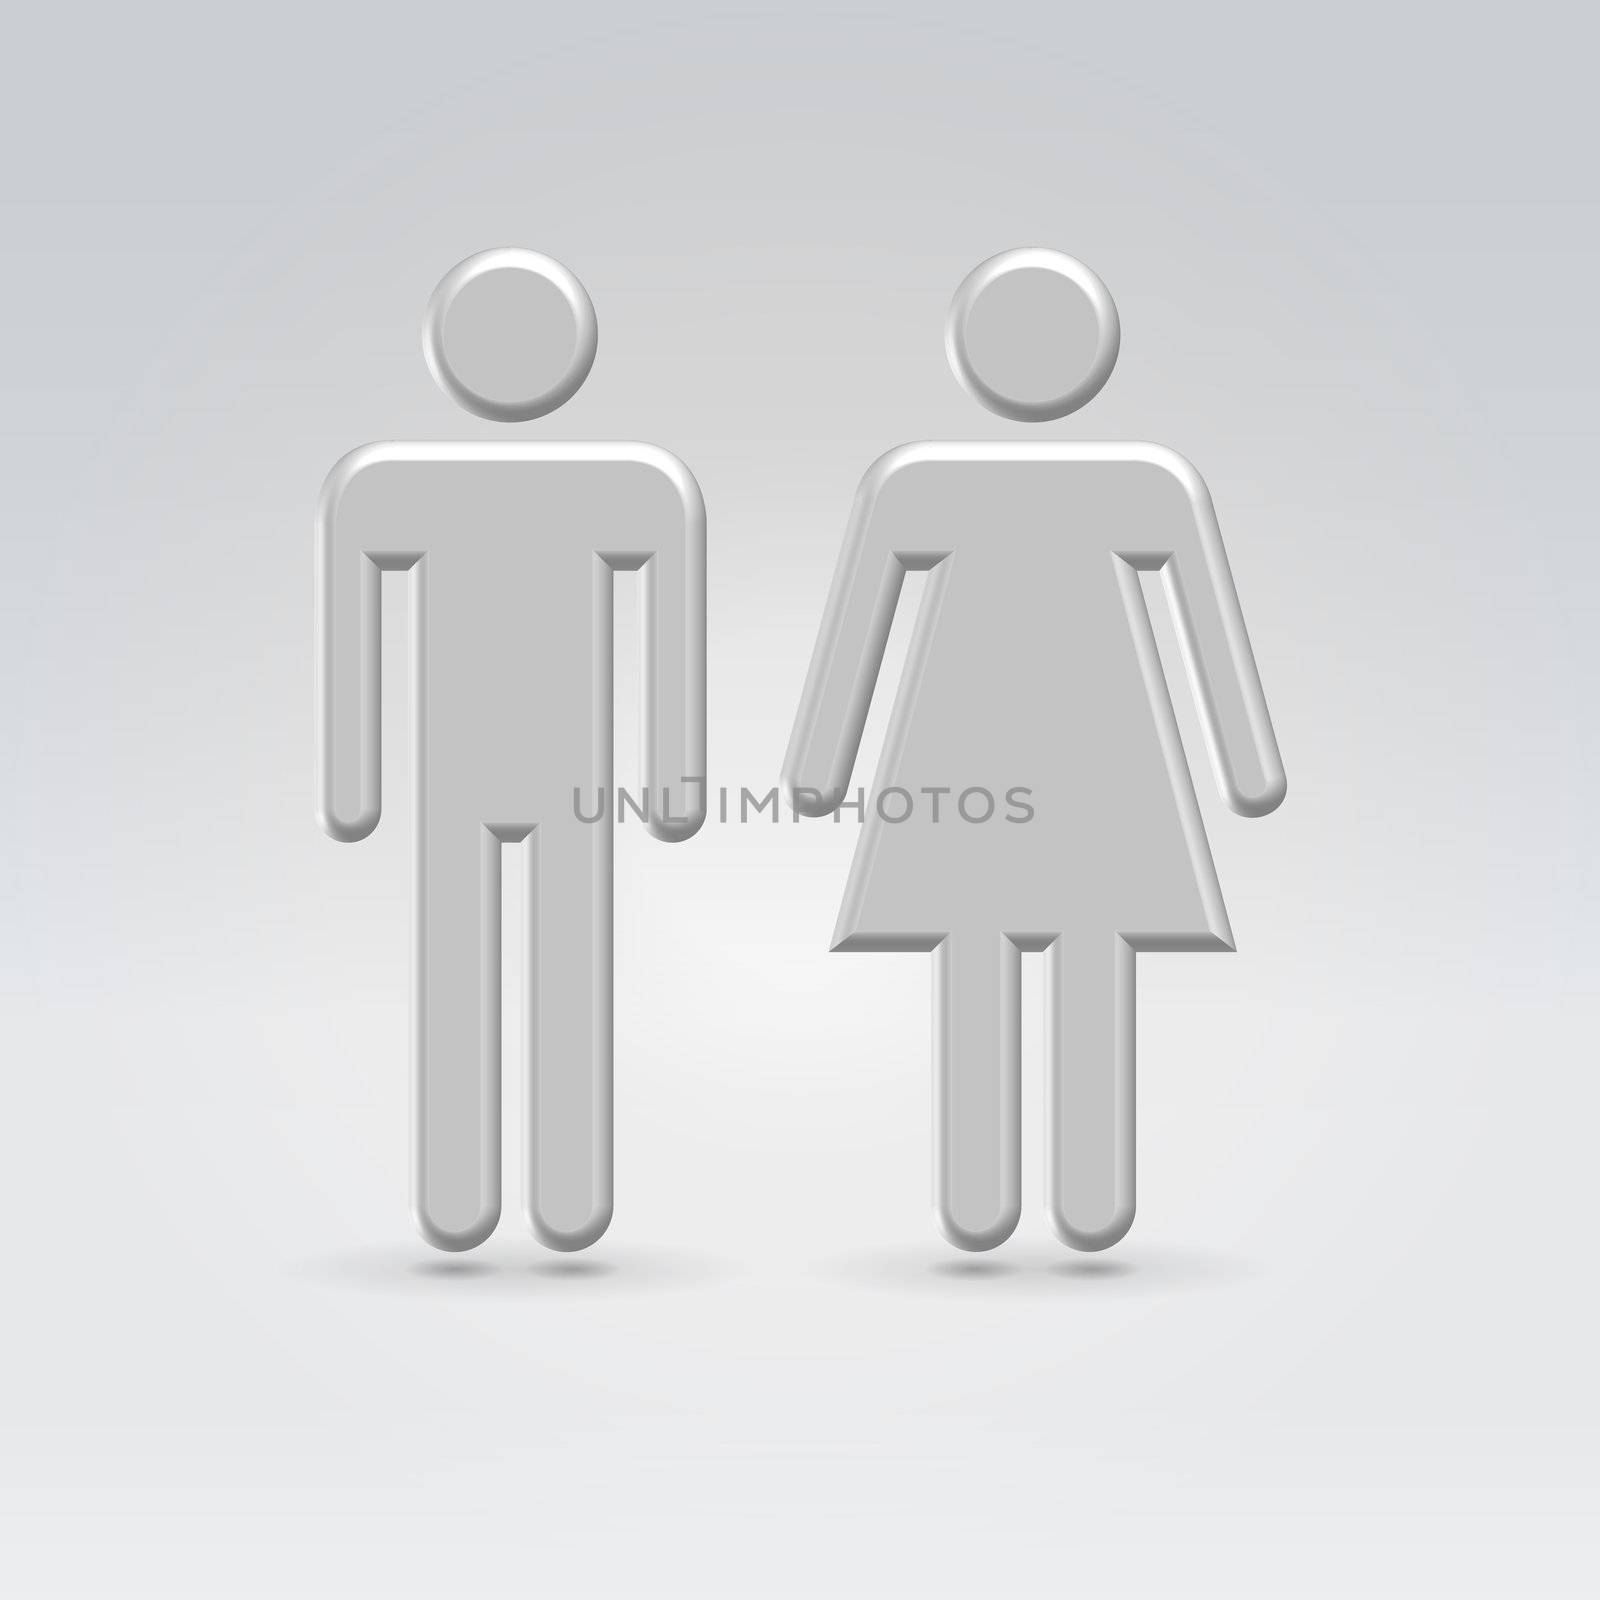 Couple icon concept shot backlit made of metal